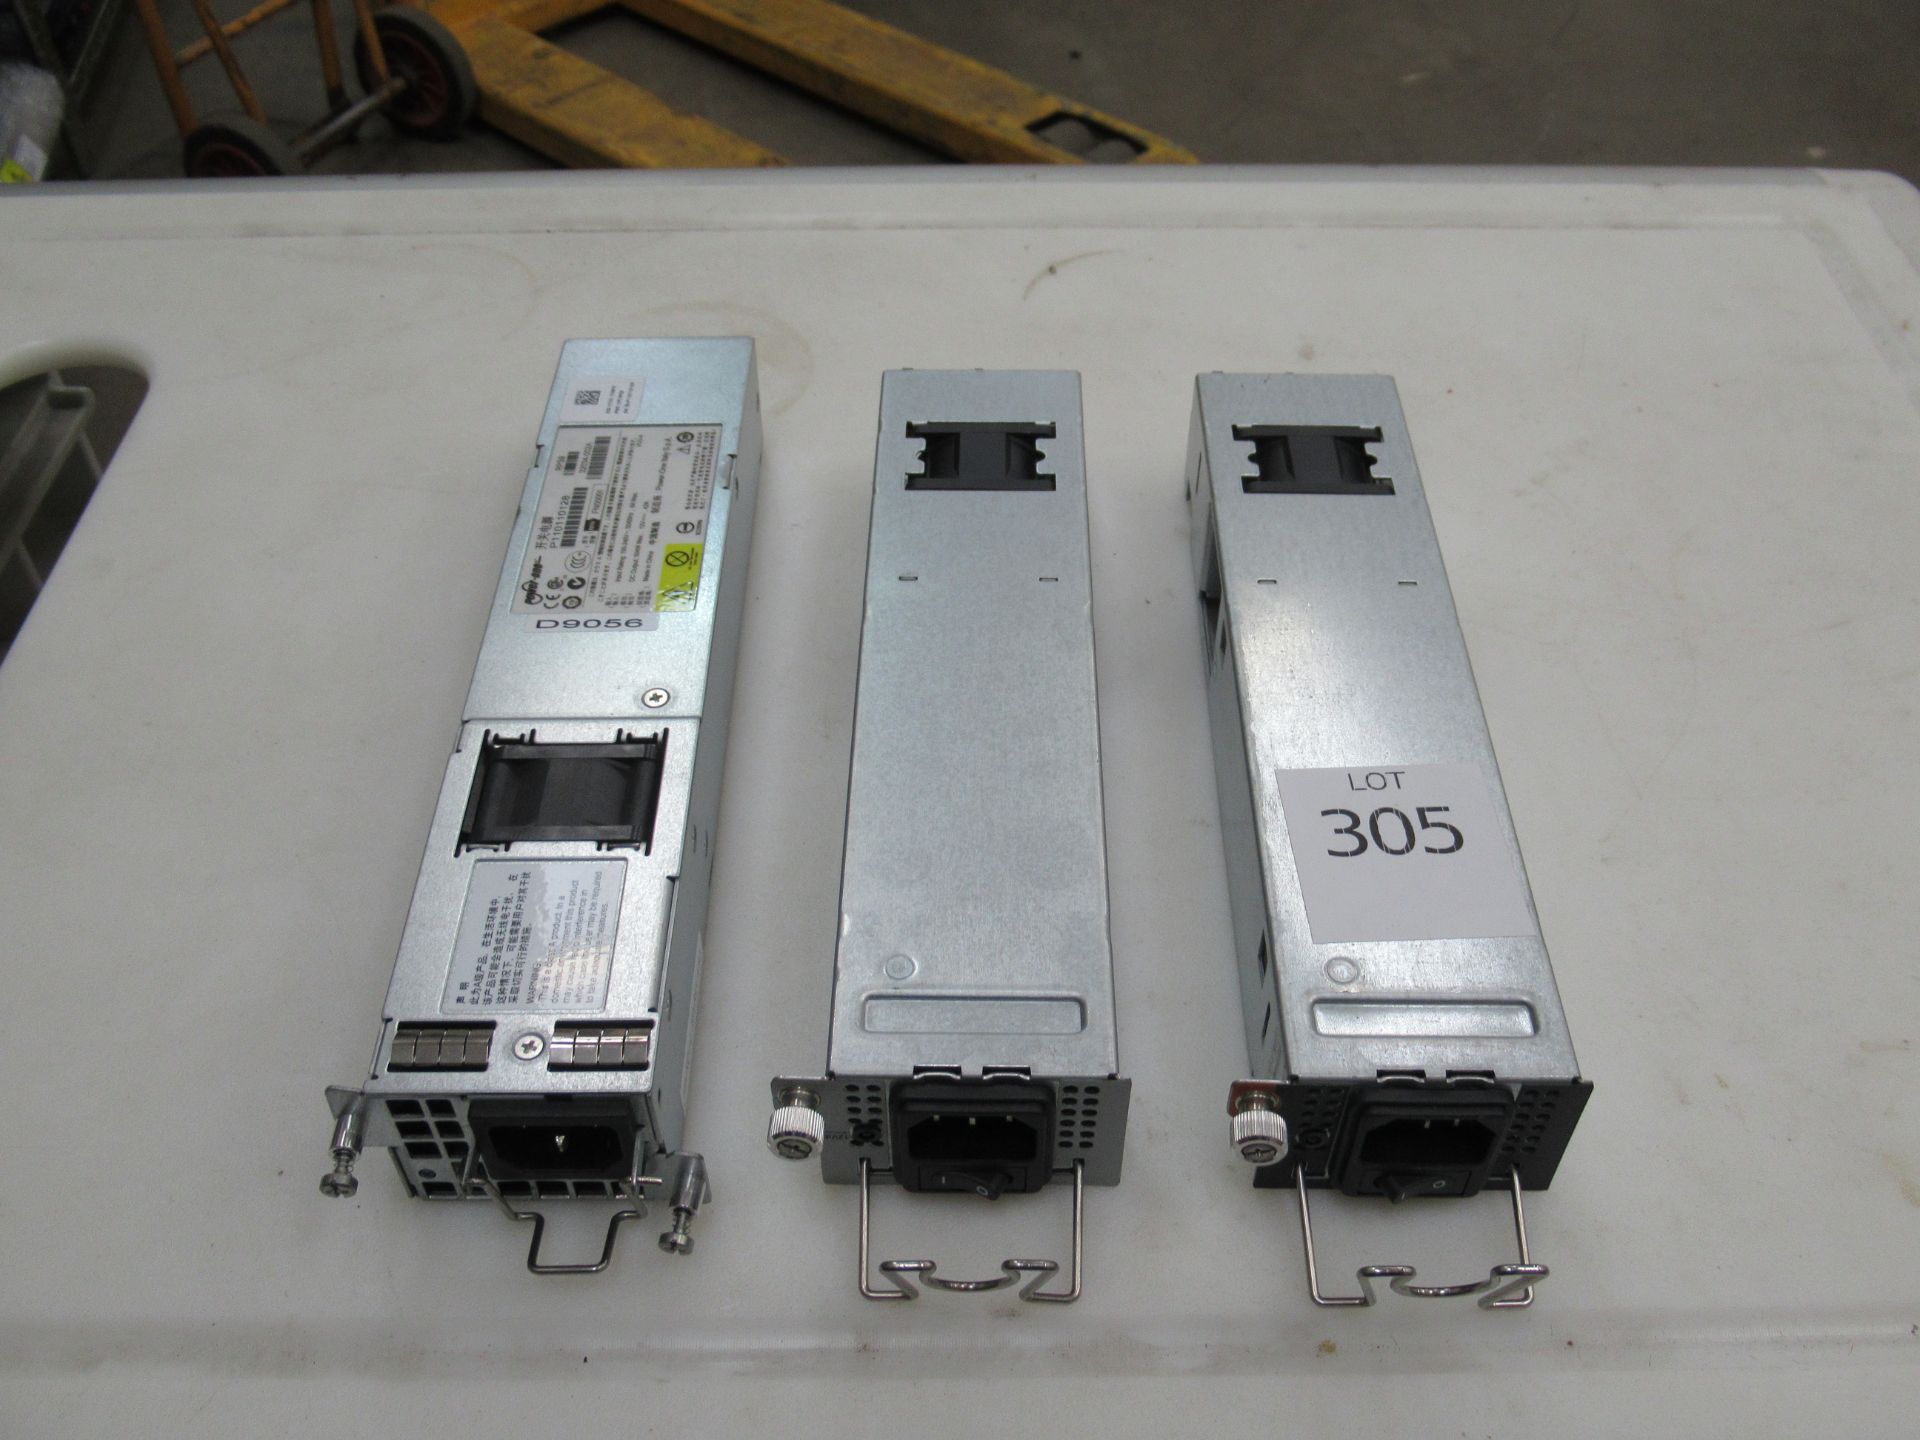 2 x Finisar Gigabit Trafic Tester in Cases and 1 x Finisar Fibre Channel Traffic Tester, Contents of - Image 24 of 48